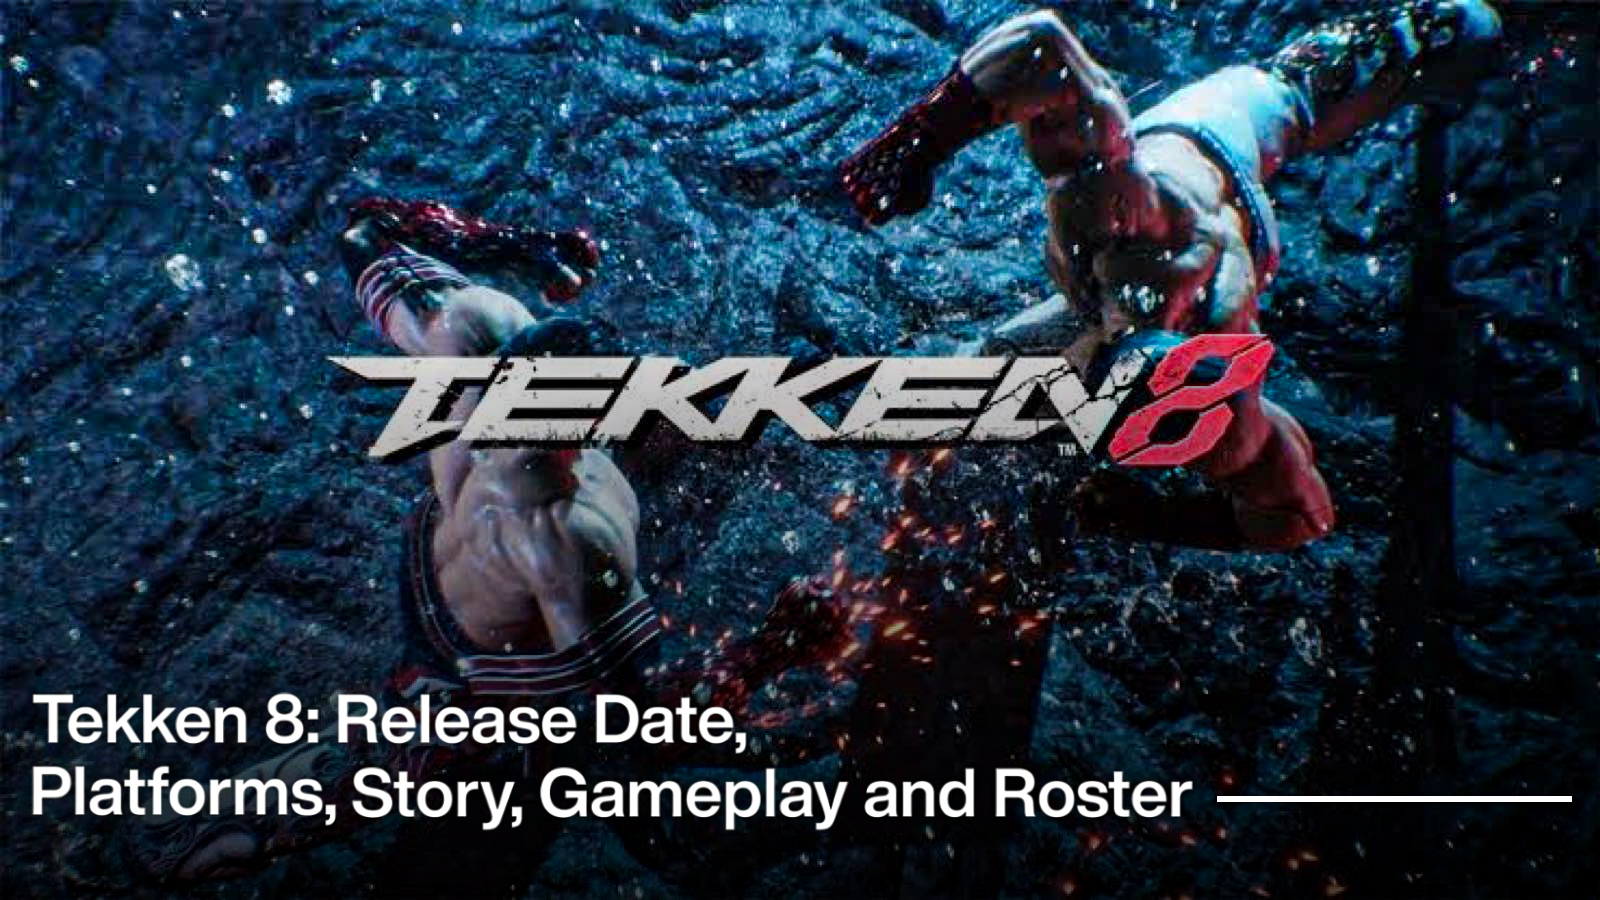 Tekken 8: Release Date, Platforms, Story, Gameplay, and Roster